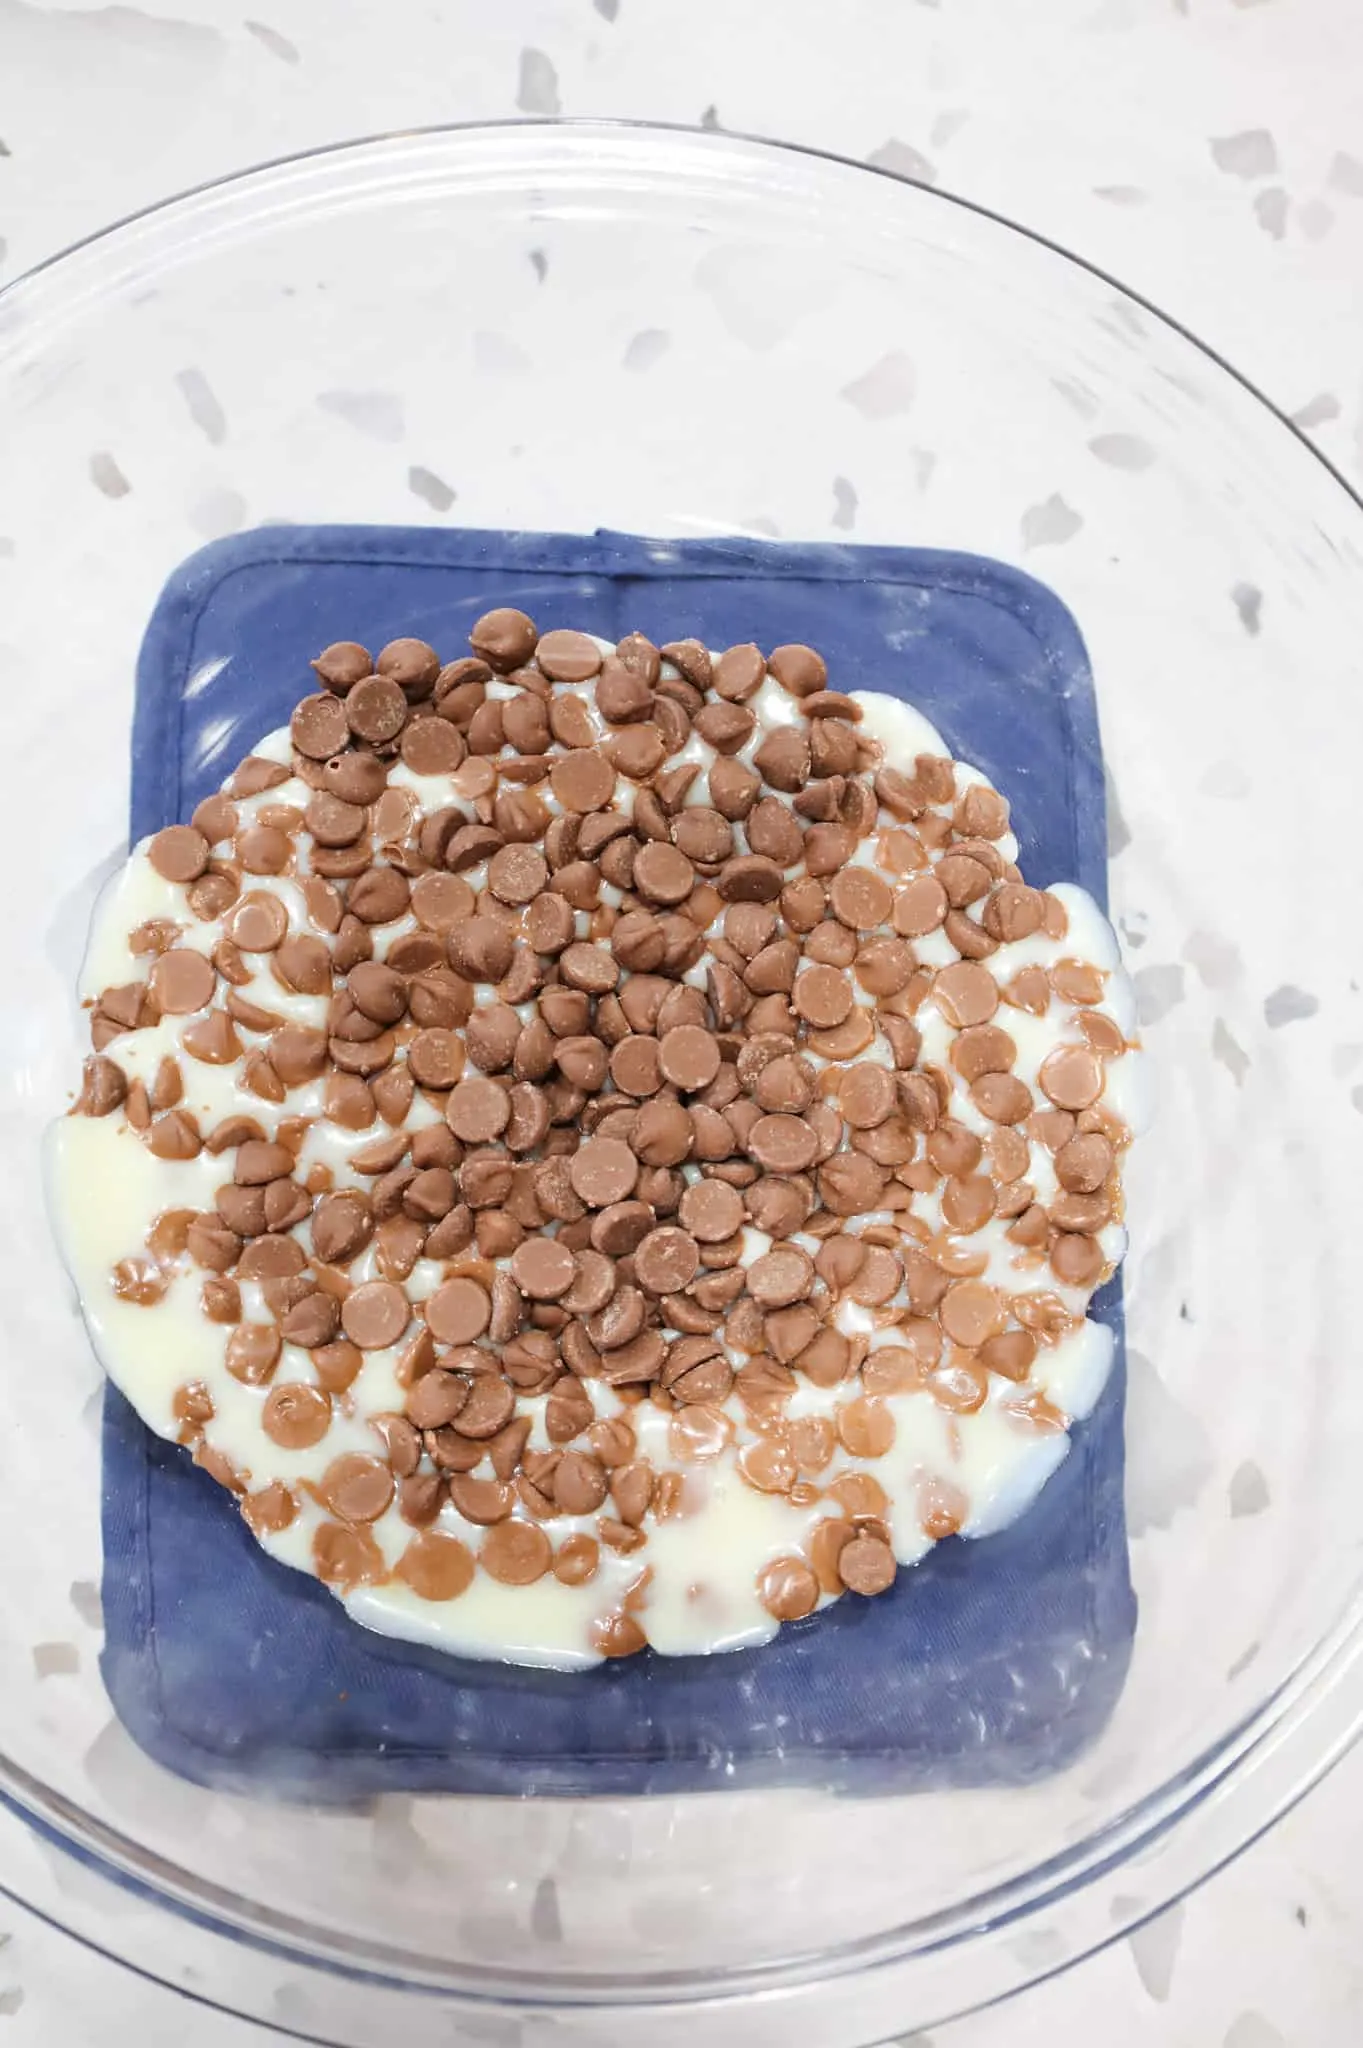 milk chocolate chips and sweetened condensed milk in a mixing bowl after microwaving